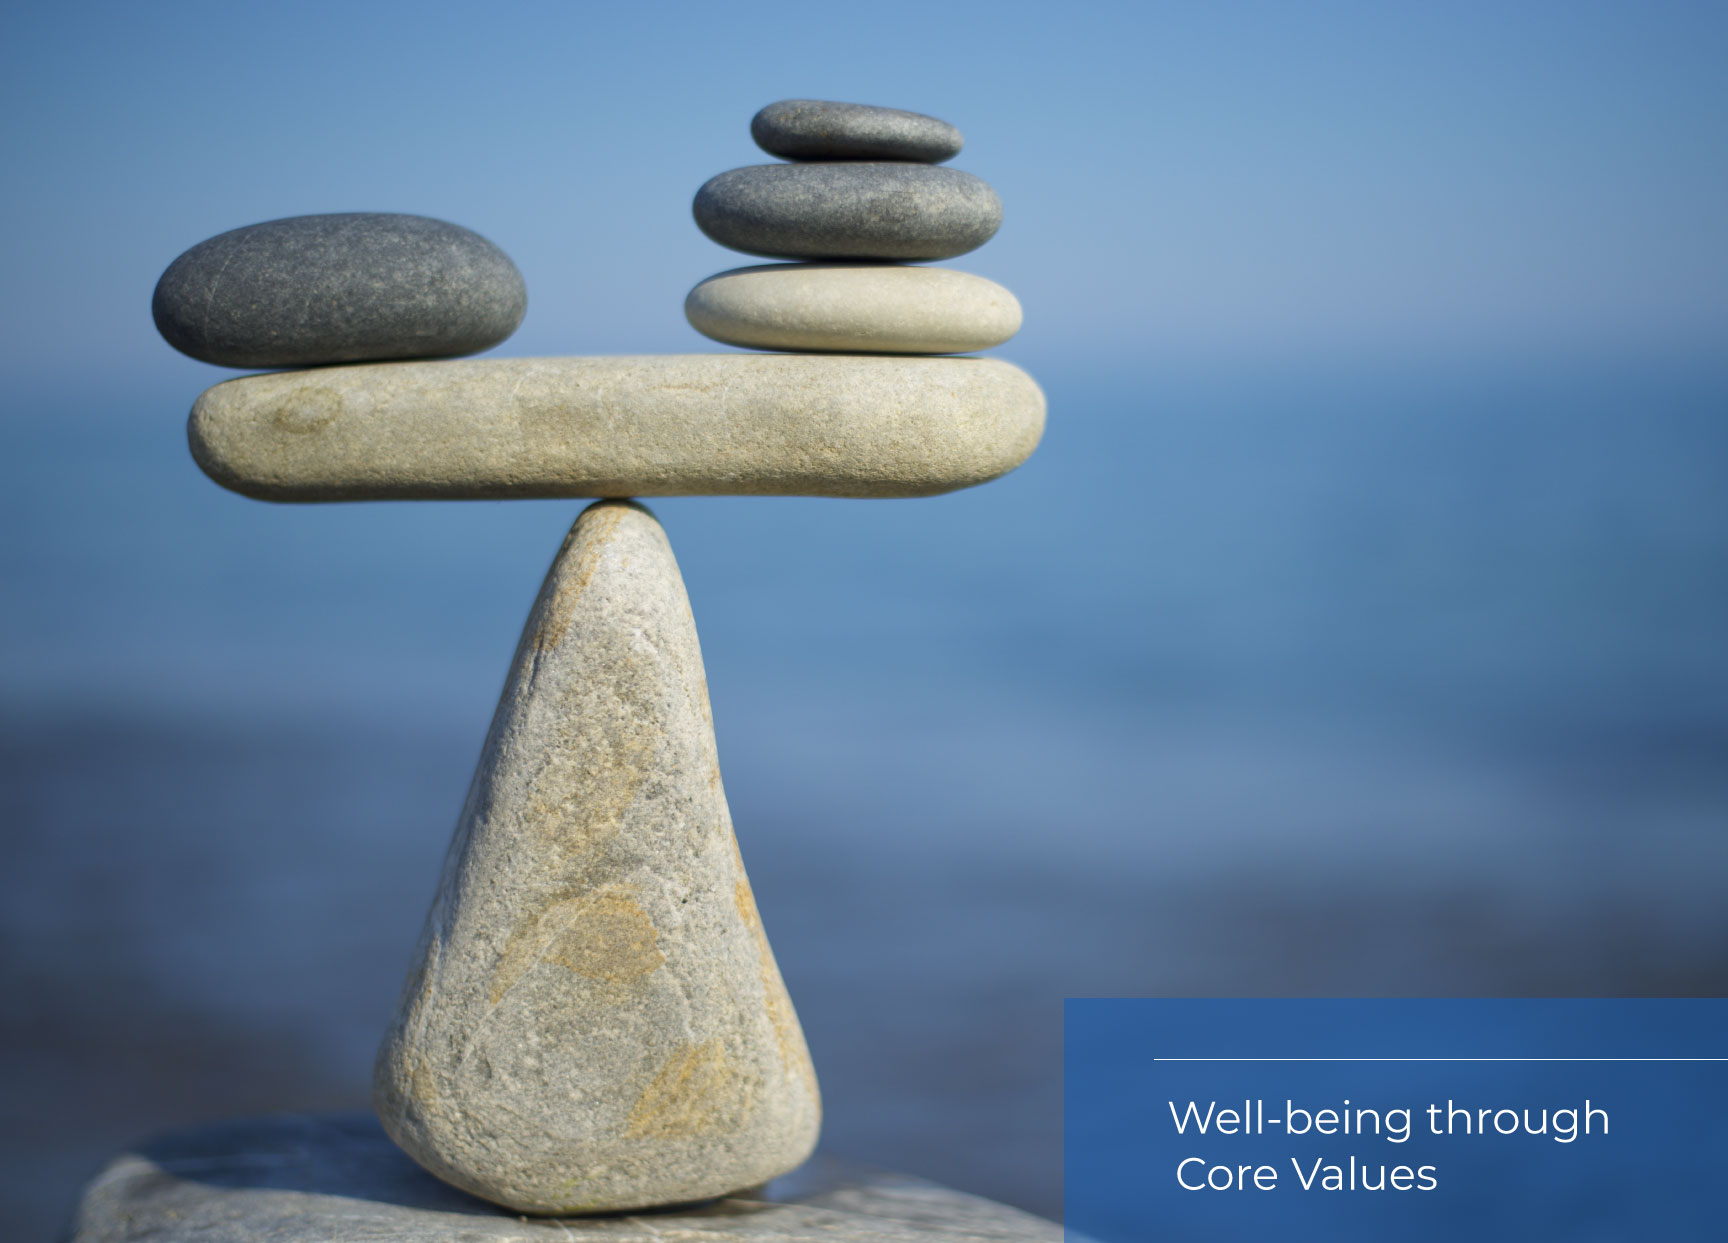 Resources on creating well being through core values